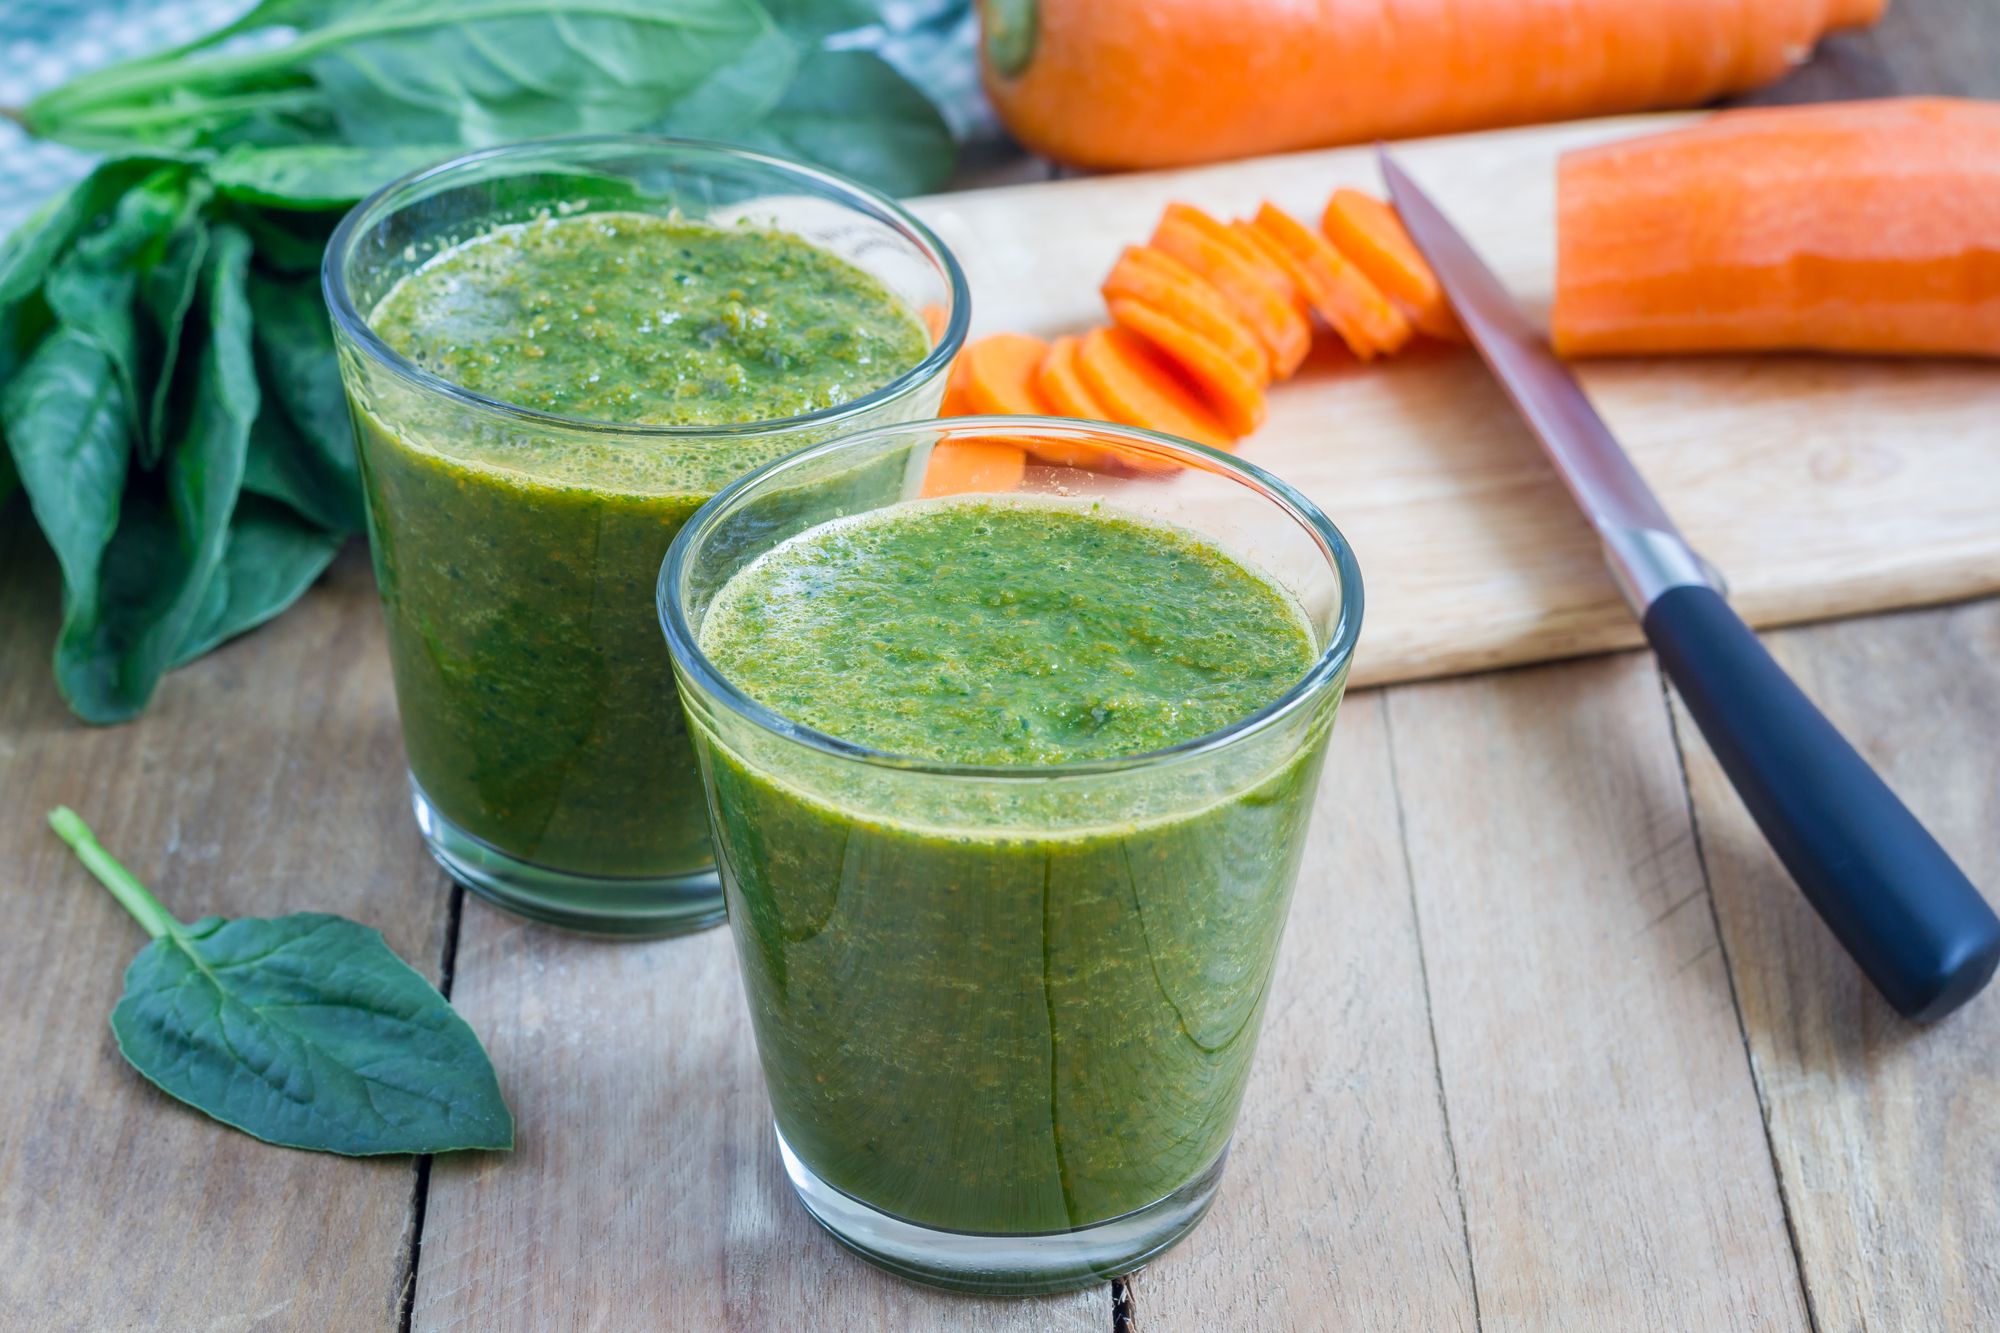 Carrot Spinach Smoothie by iuliia_n | www.shutterstock.com